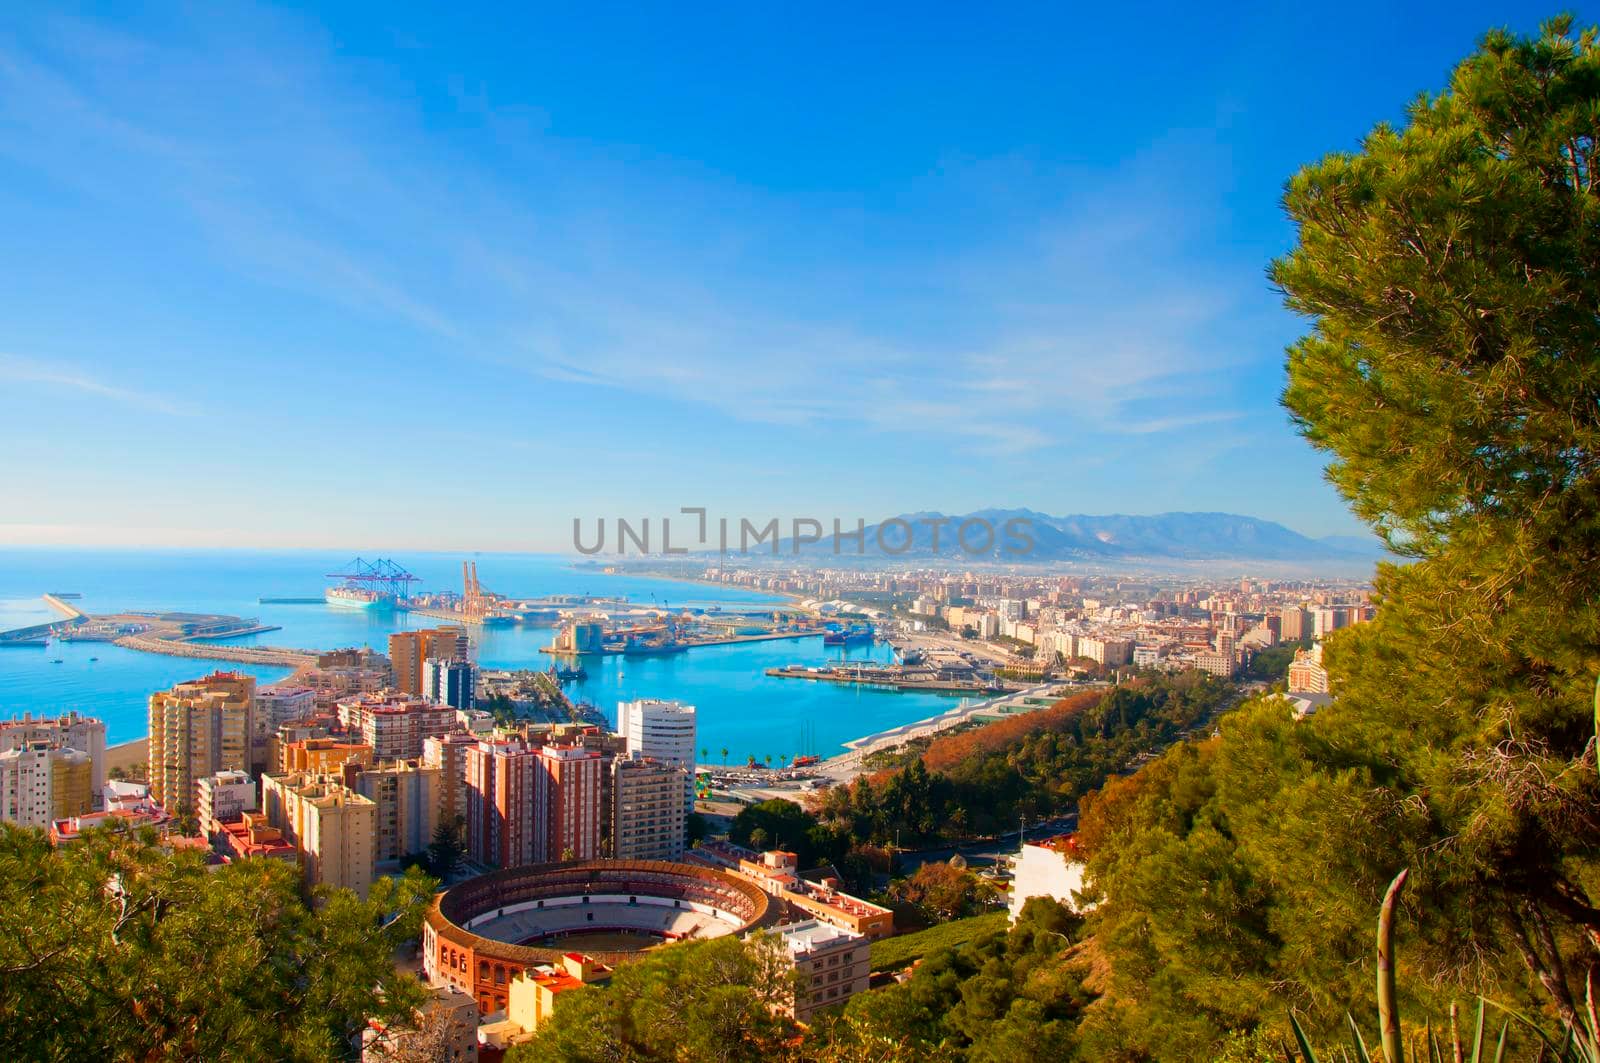 View on the mediterranean sea, buildings, pine trees and mountains. Malaga, Spain